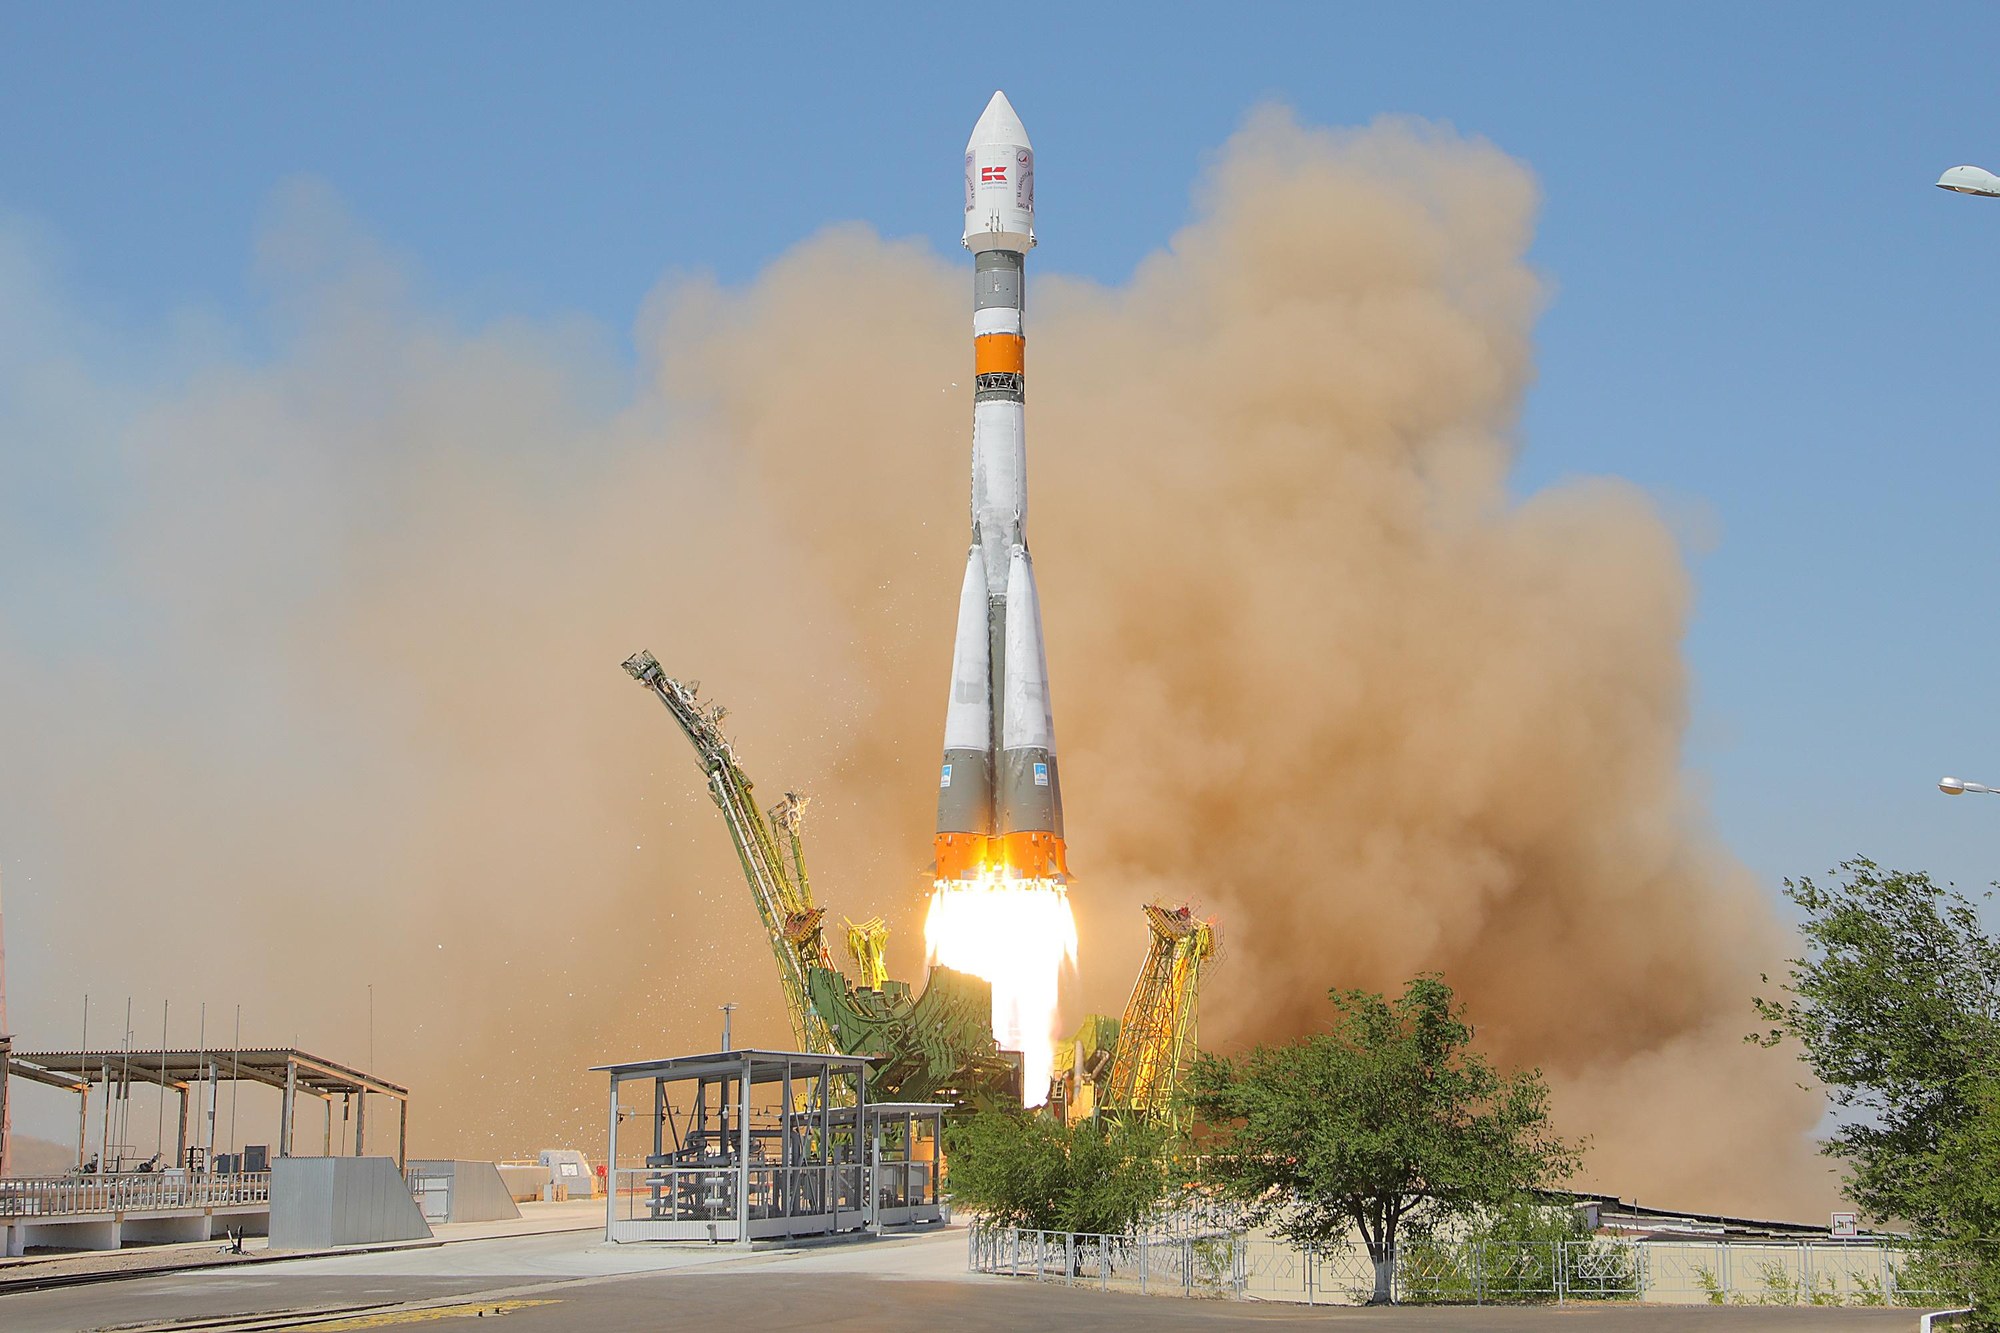 The Soyuz launch vehicle carrying TET-1 after launch on 22 July 2012